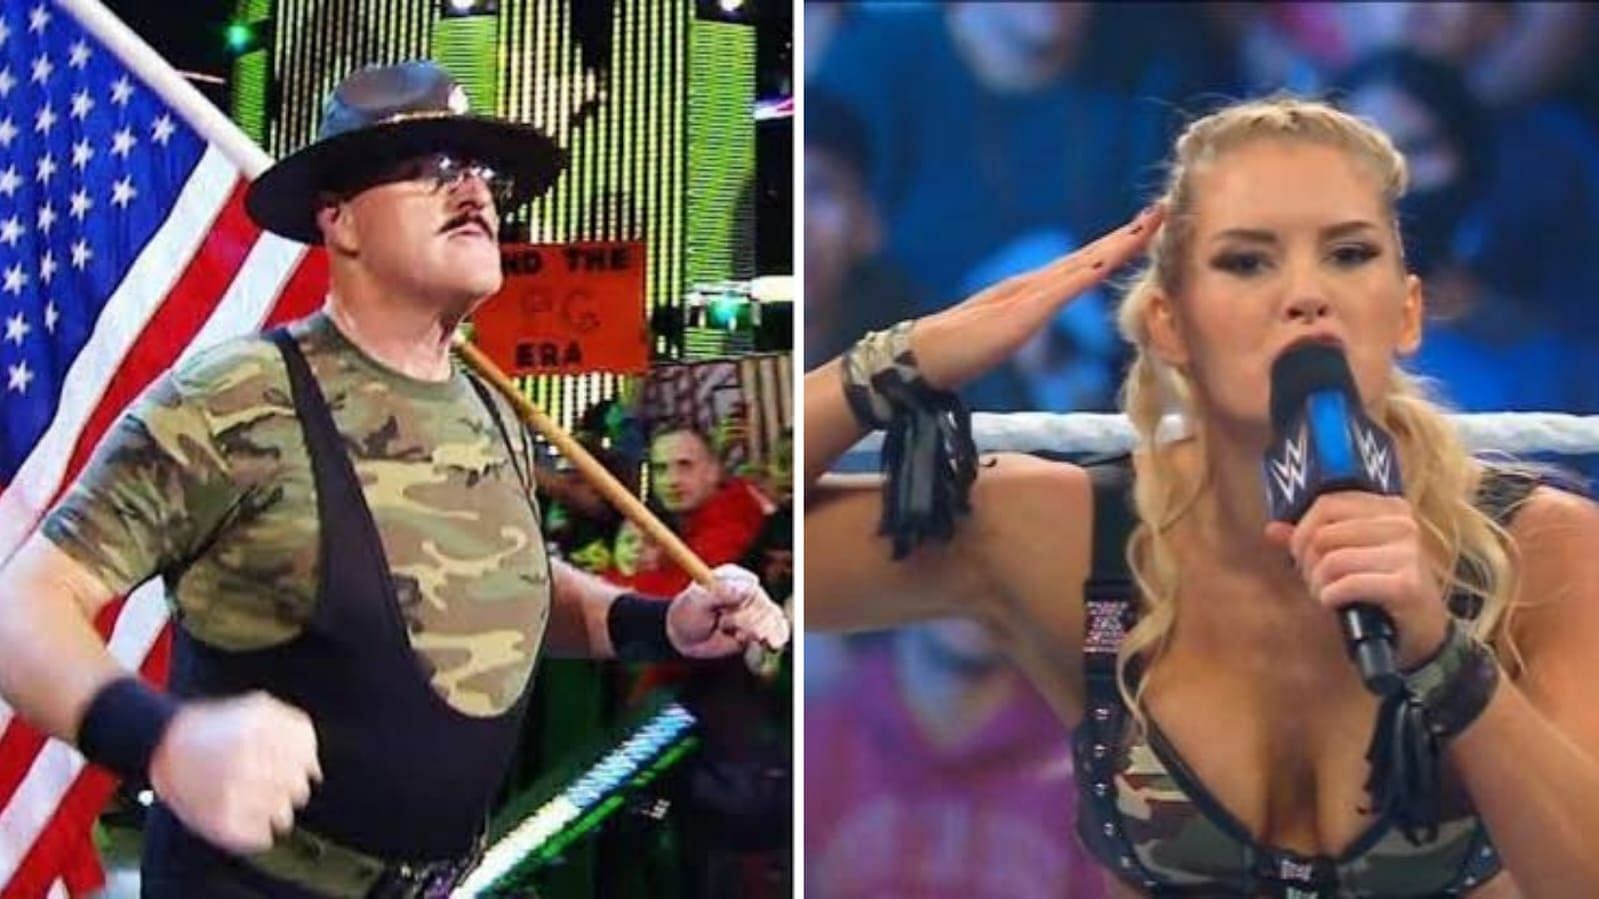 Sgt. Slaughter is not pleased with Lacey Evans